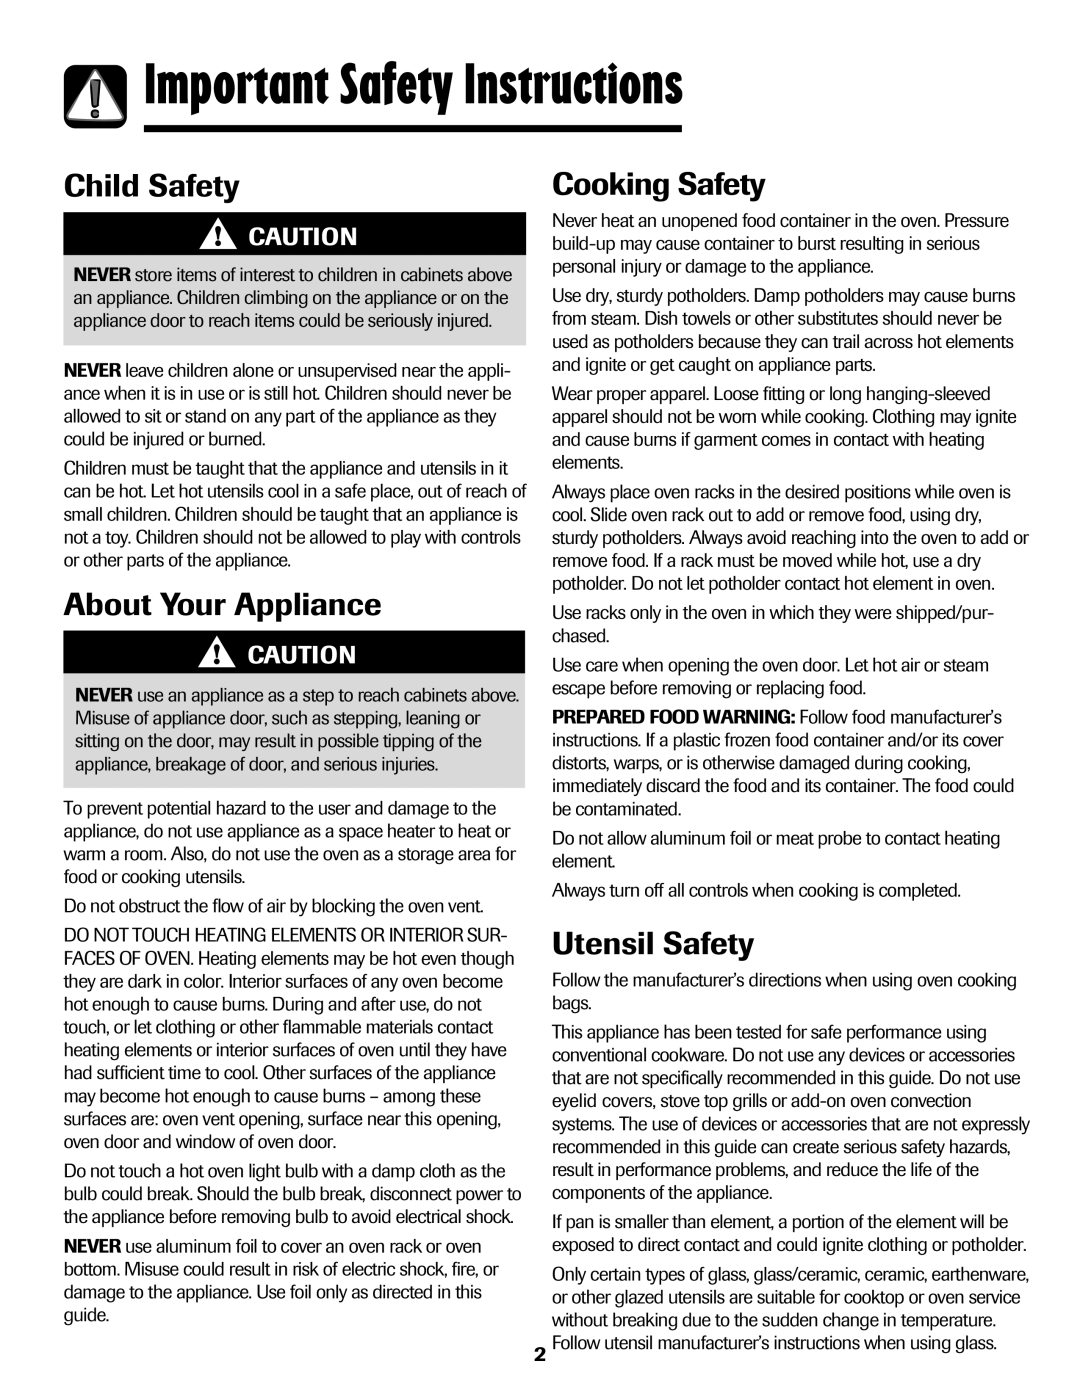 Amana Coil Important Safety Instructions, Child Safety, About Your Appliance, Cooking Safety, Utensil Safety 